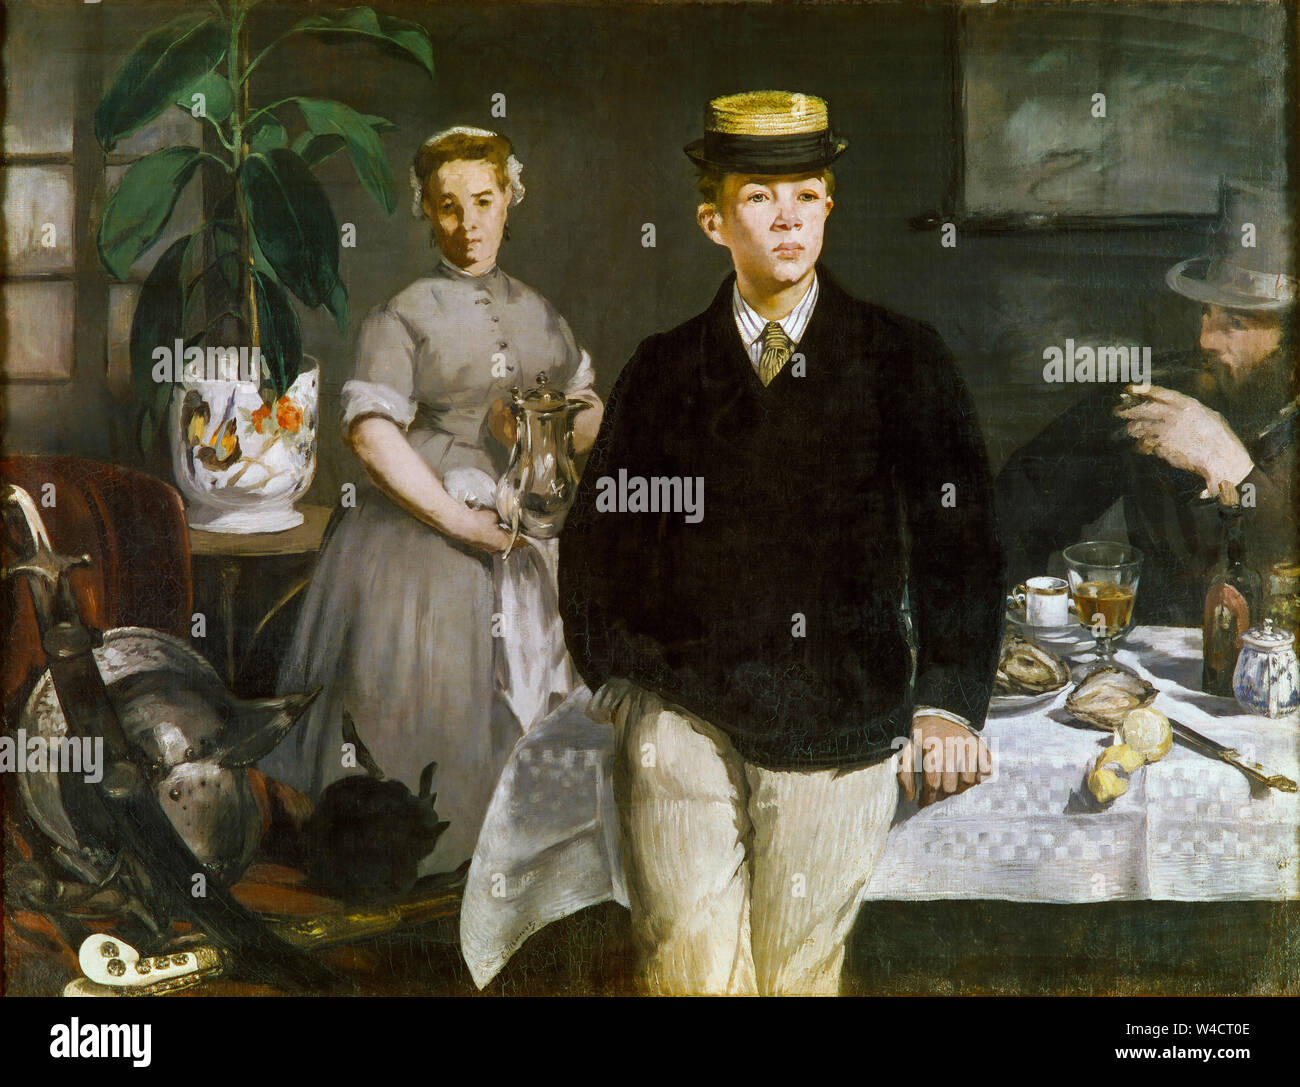 Edouard Manet, Luncheon in the Studio, painting, 1868-1869 Stock Photo